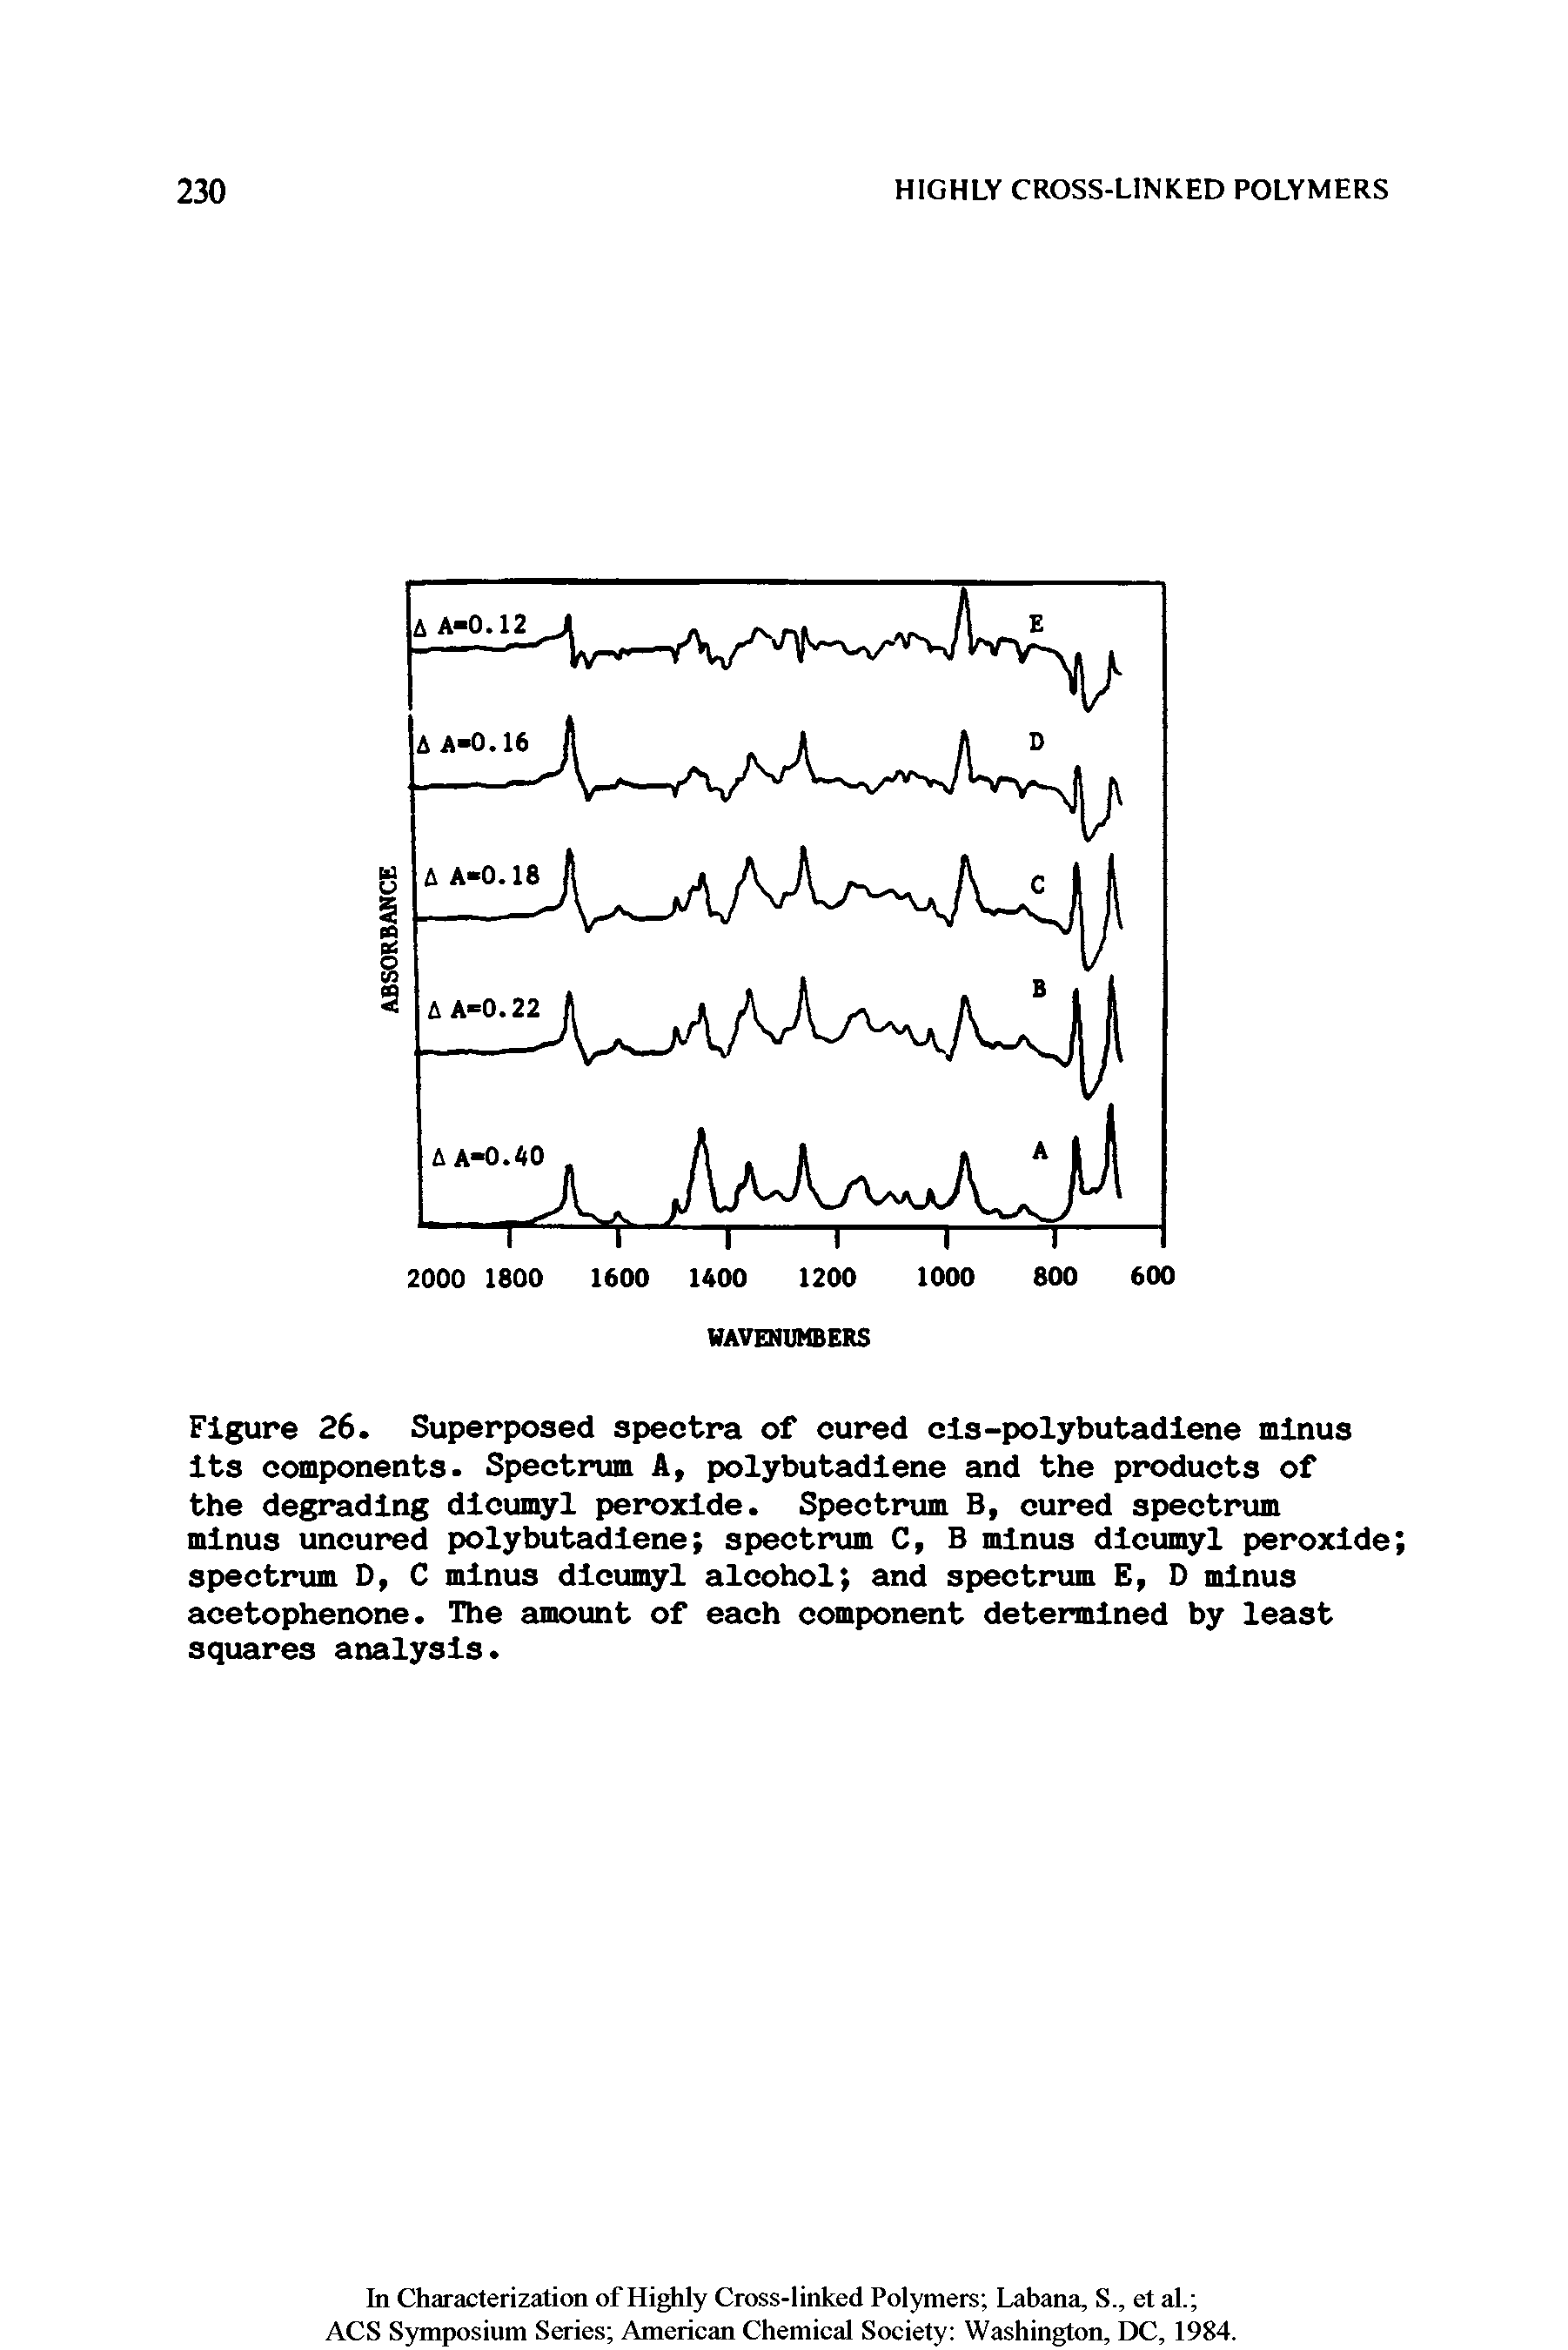 Figure 26. Superposed spectra of cured els-polybutadiene minus its components. Spectrum A, polybutadiene and the products of the degrading dicumyl peroxide. Spectrum B, cured spectrum minus uncured polybutadiene spectrum C, B minus dicumyl peroxide spectrum D, C minus dicumyl alcohol and spectrum E, D minus acetophenone. The amount of each component determined by least squares analysis.